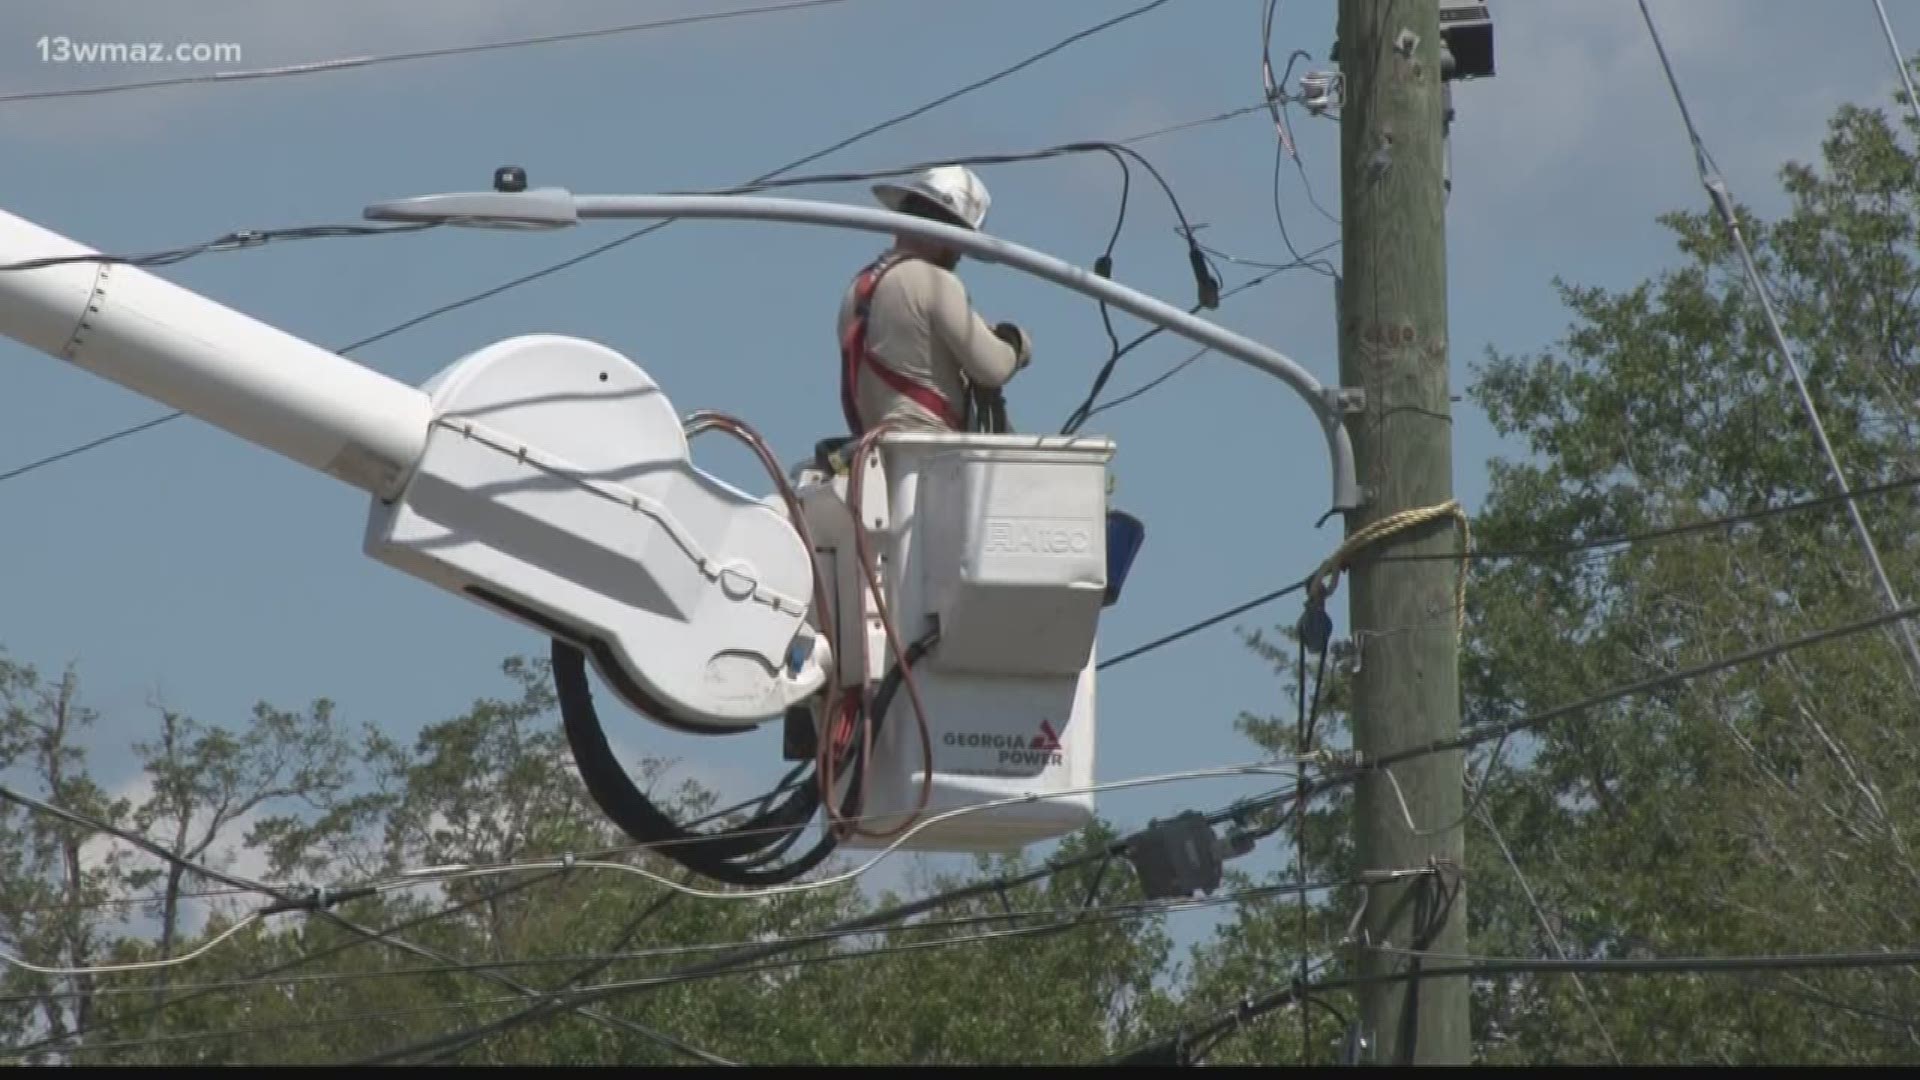 A Warner Robins woman is upset after her power was cut off during below freezing weather. Is it legal for utilities to disconnect power if it's below freezing?